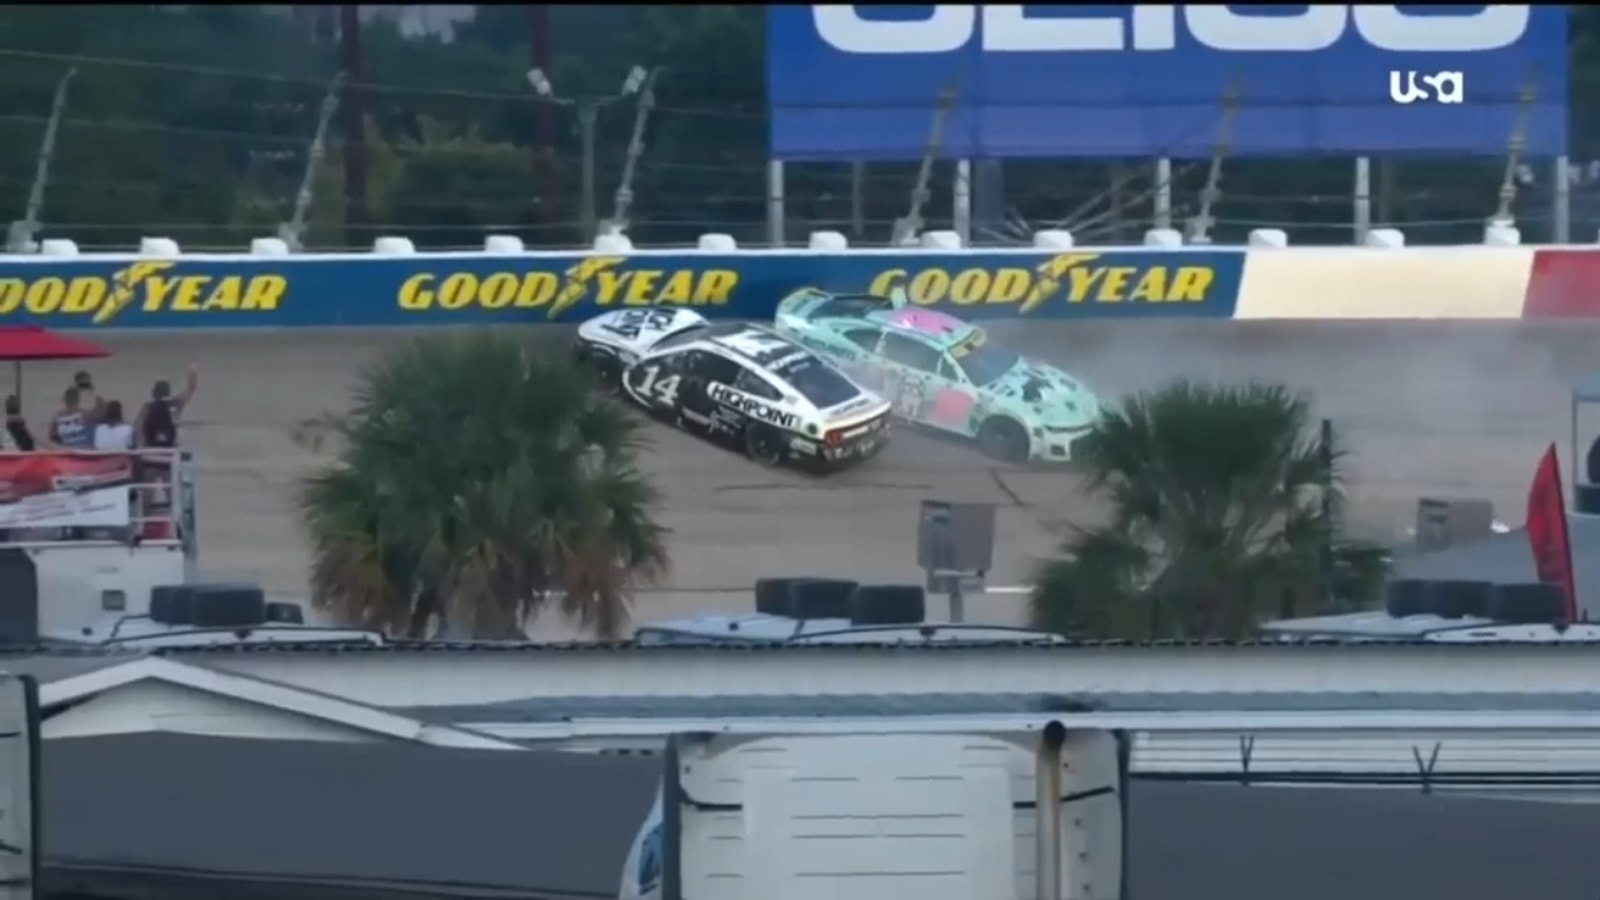 Chase Elliott's day ends after collision with Turn 1 wall